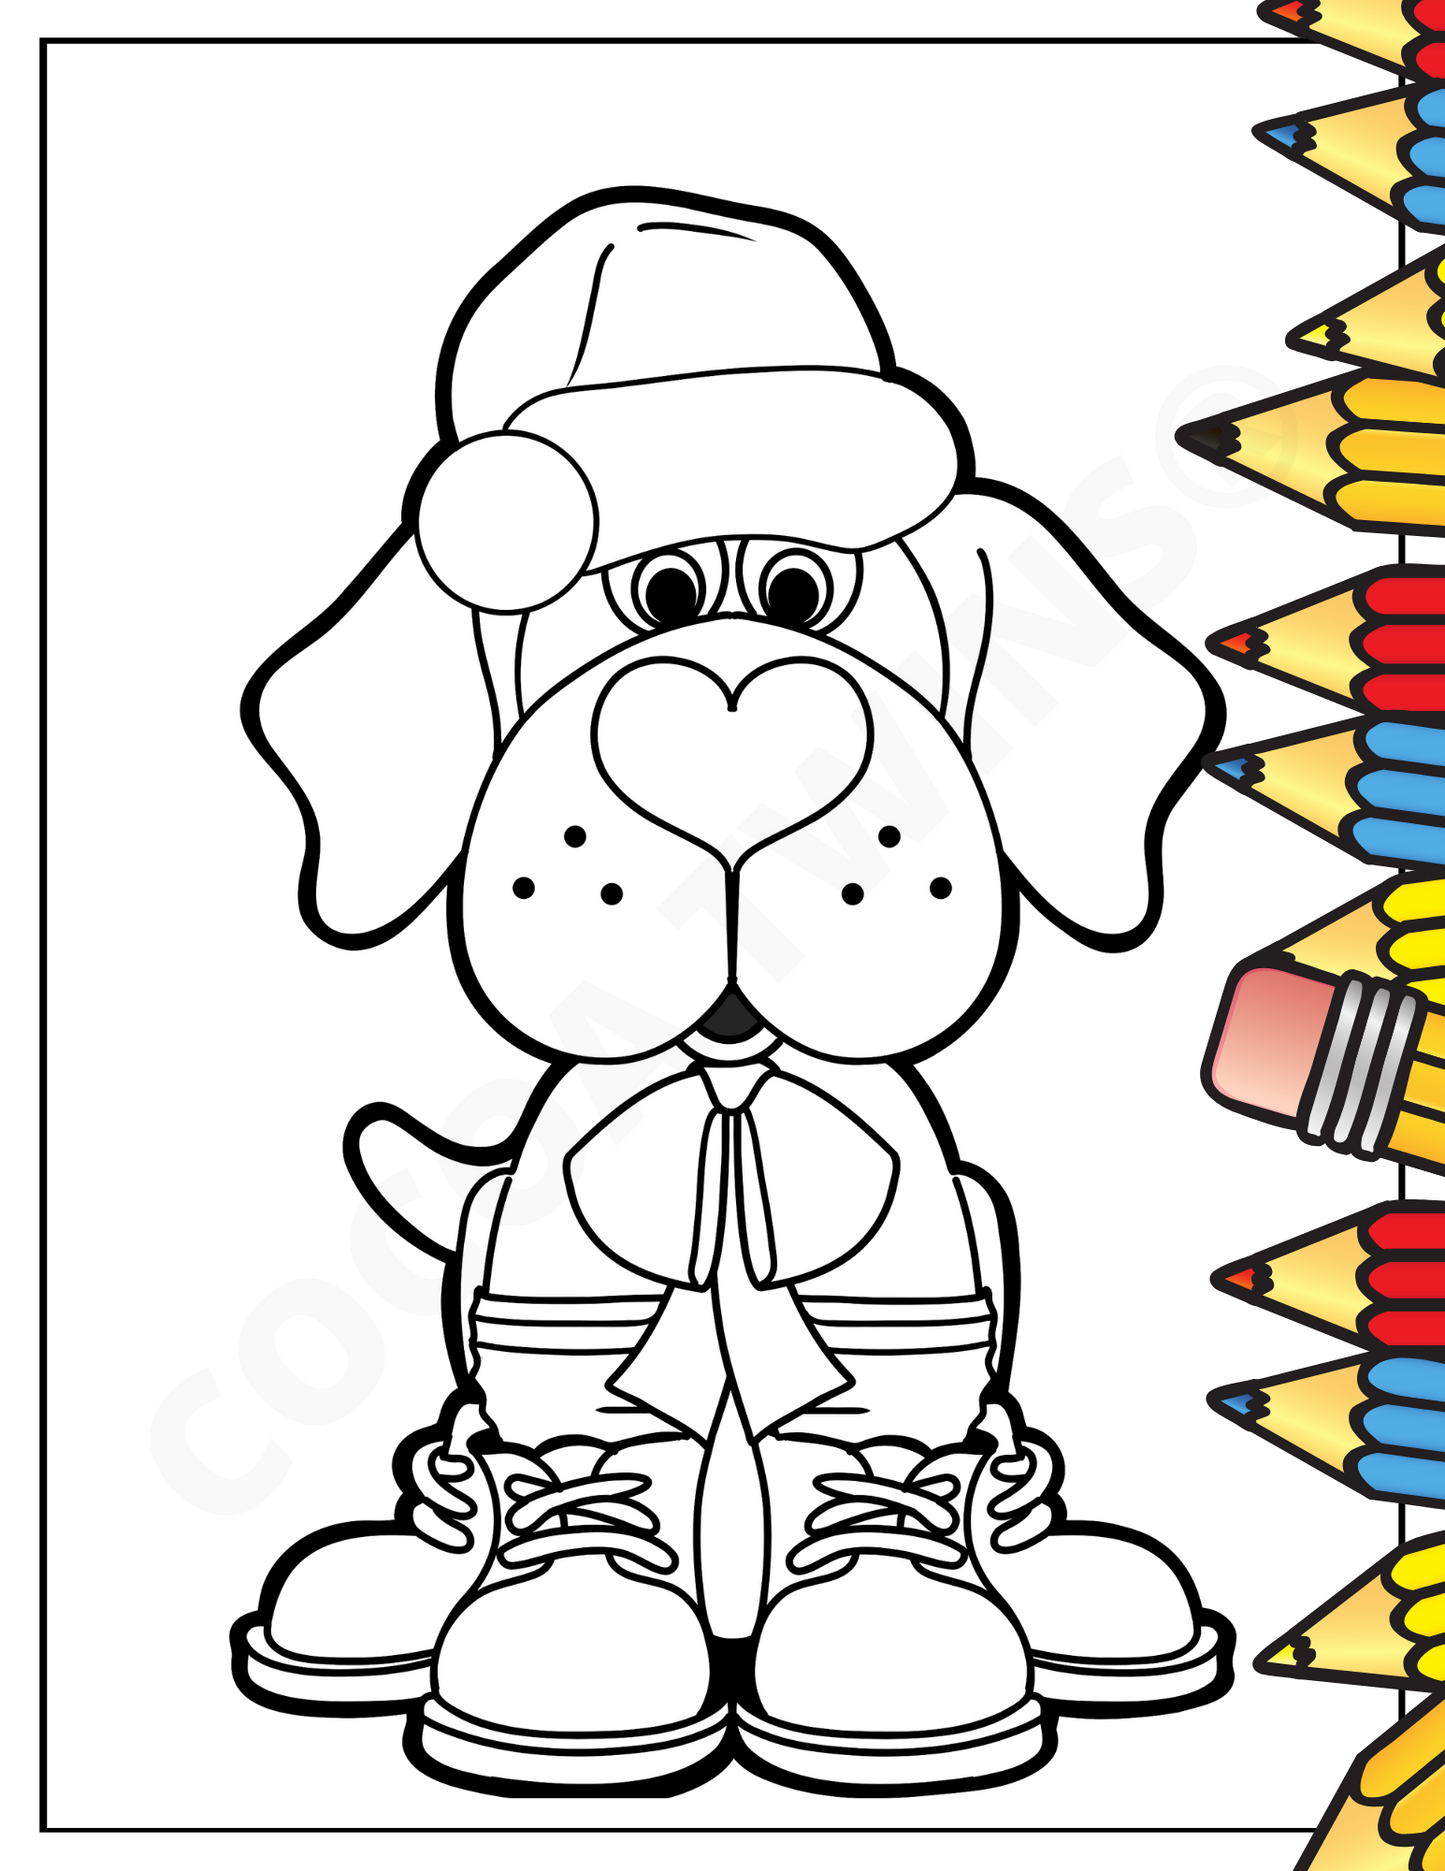 Printable Coloring Page | Mr Twiggy | 1120212